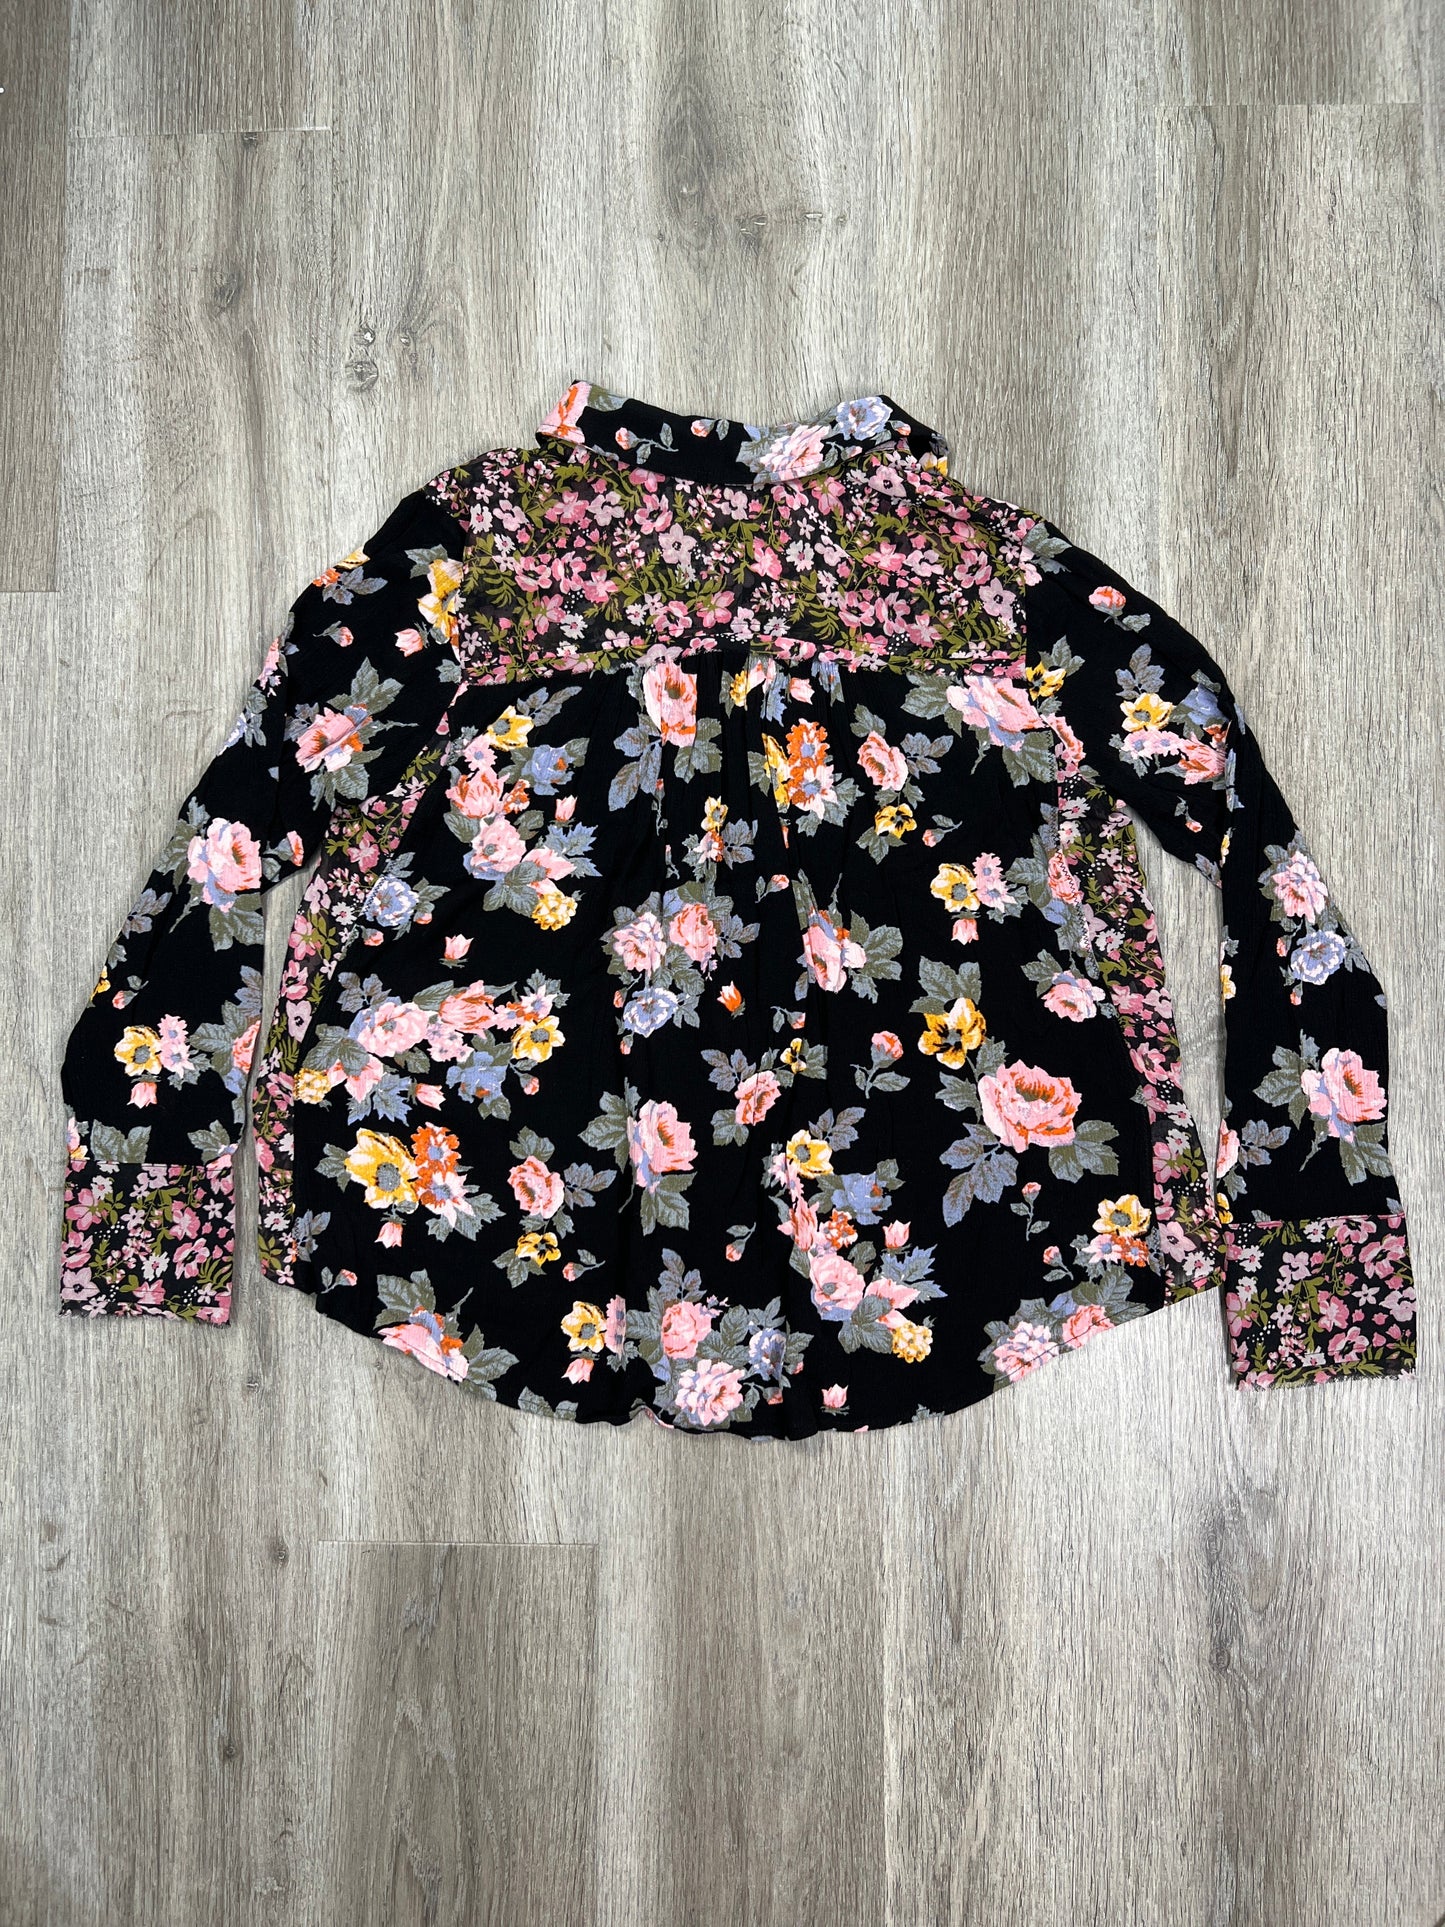 Floral Print Blouse Long Sleeve Free People, Size S